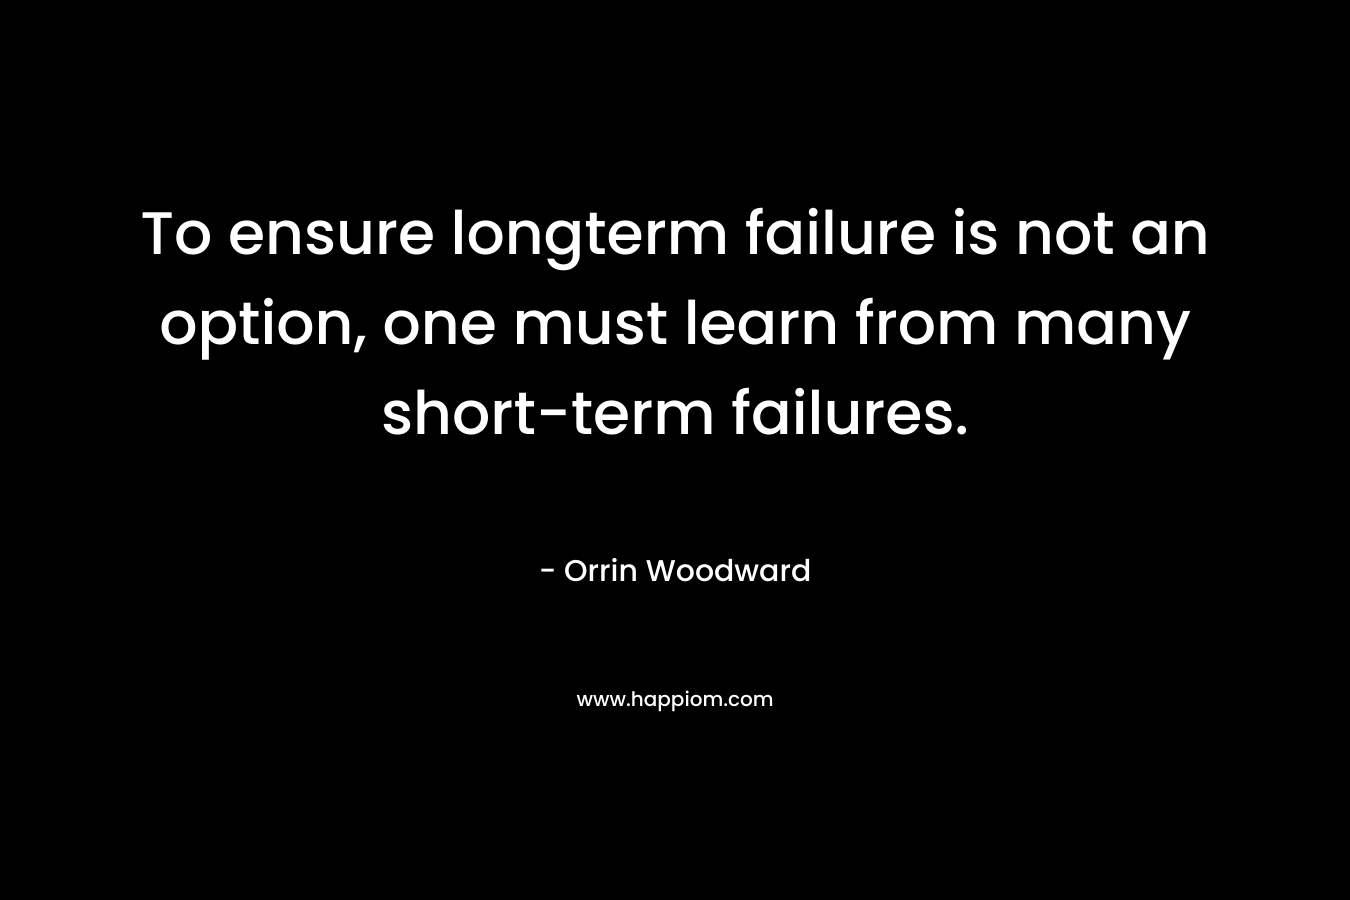 To ensure longterm failure is not an option, one must learn from many short-term failures. – Orrin Woodward